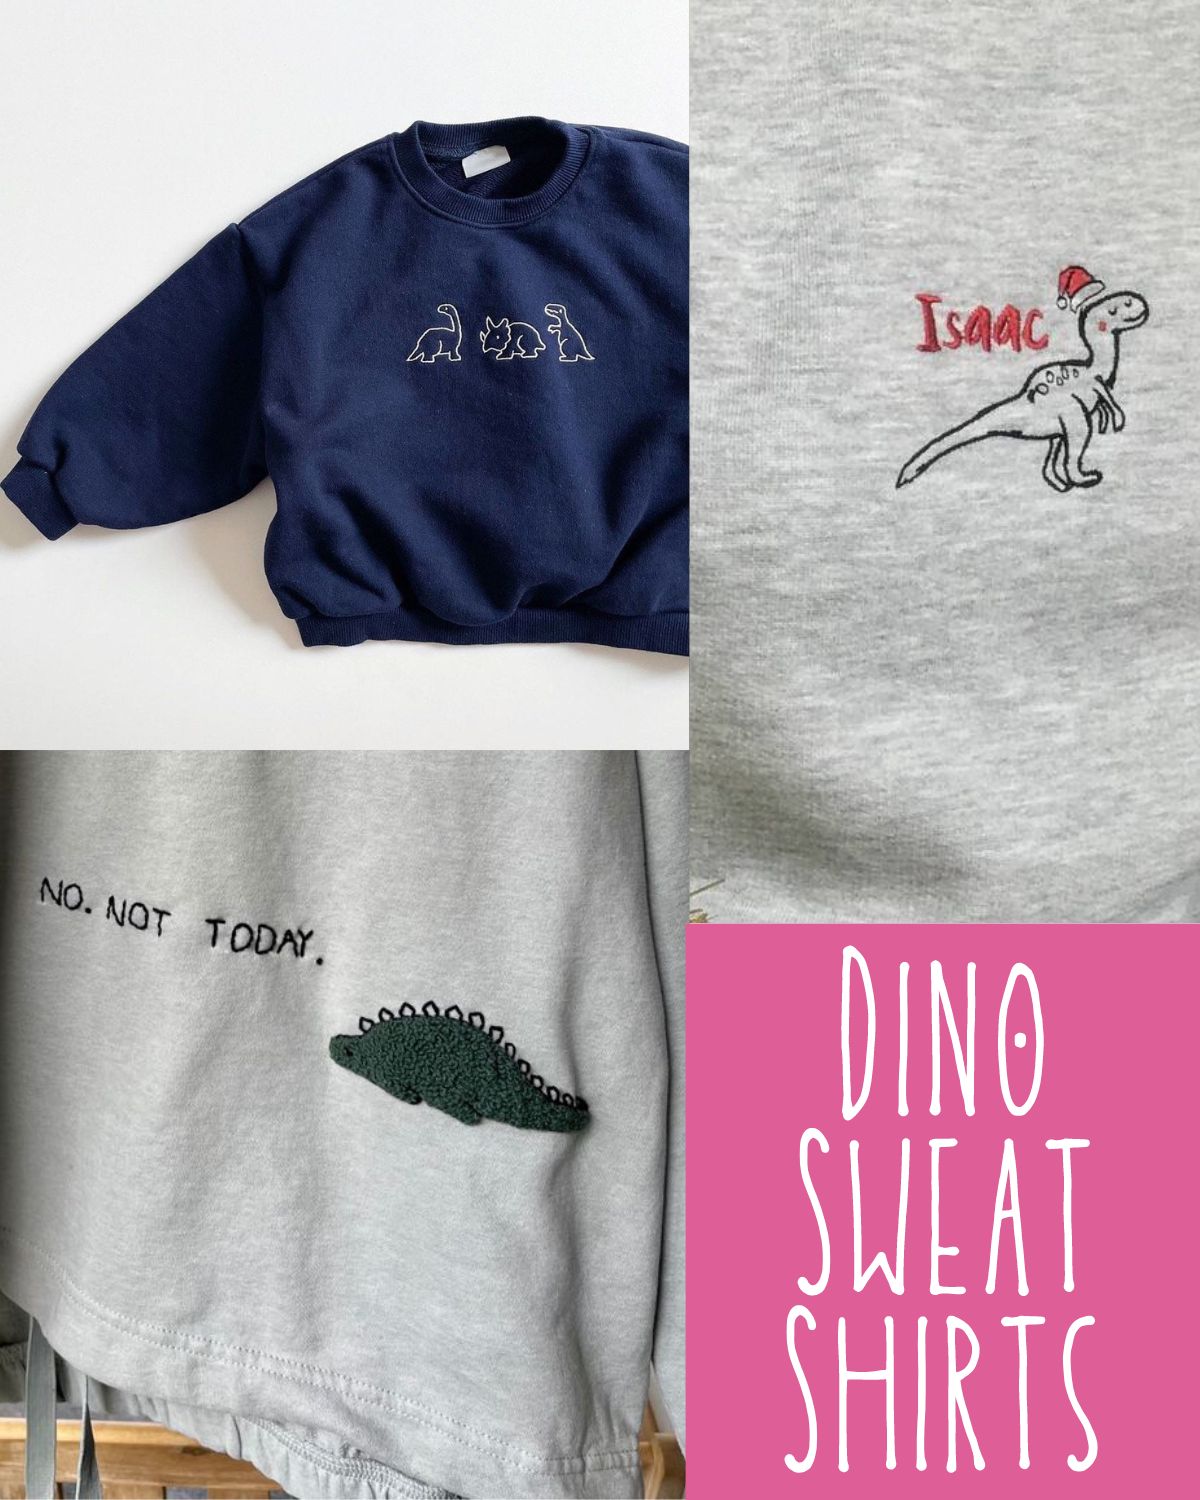 Three sweatshirts with embroidered characters on it